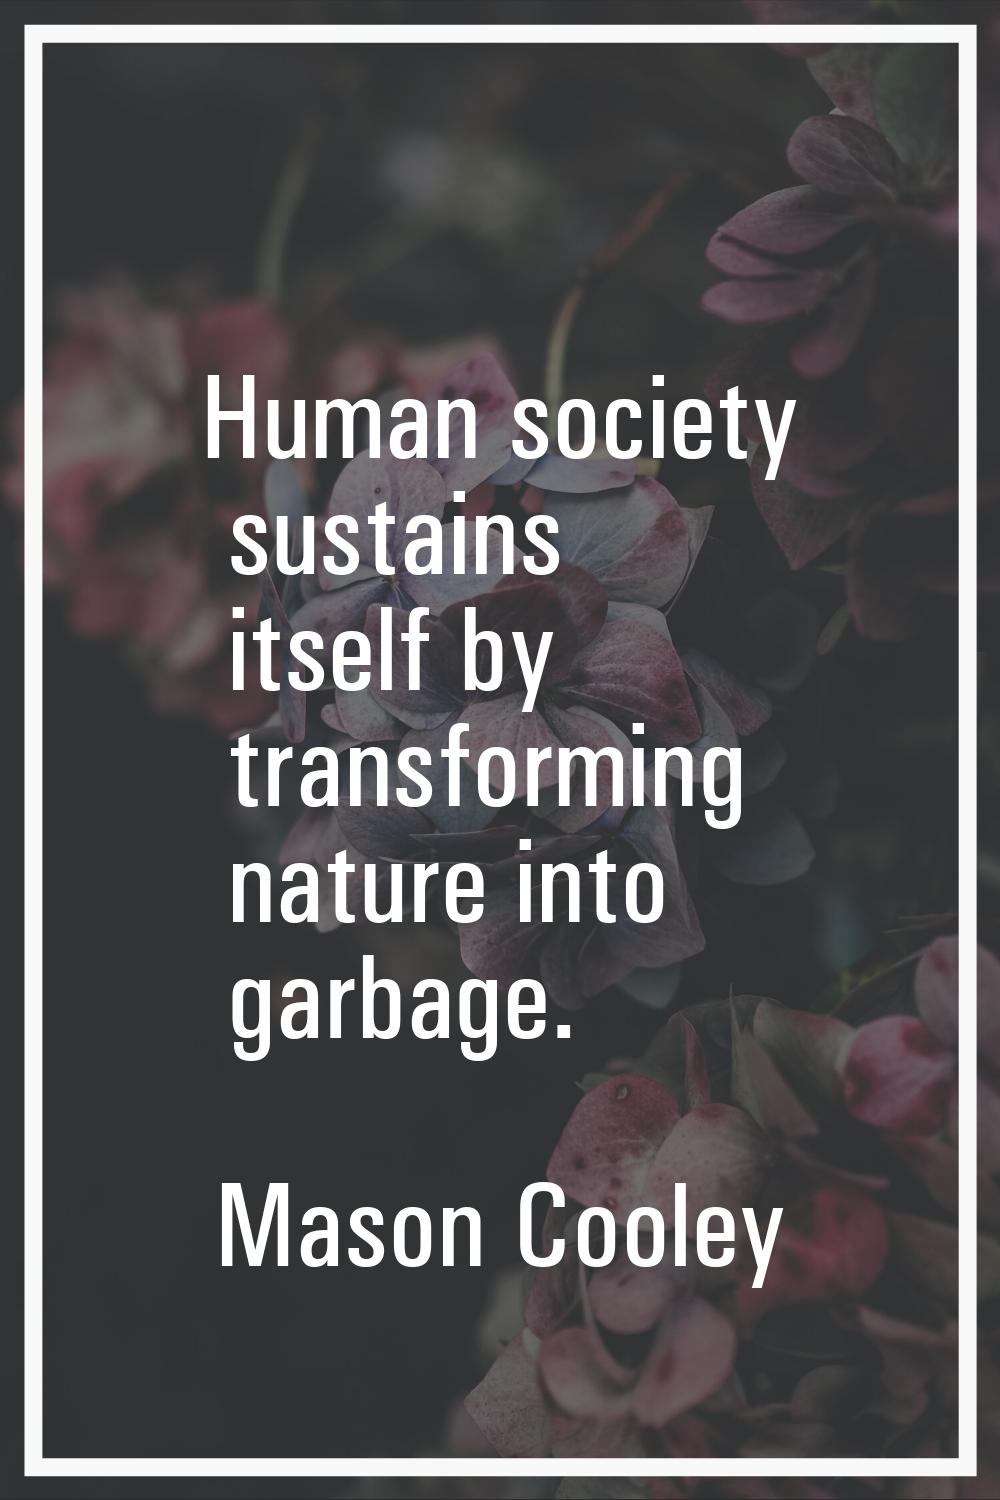 Human society sustains itself by transforming nature into garbage.